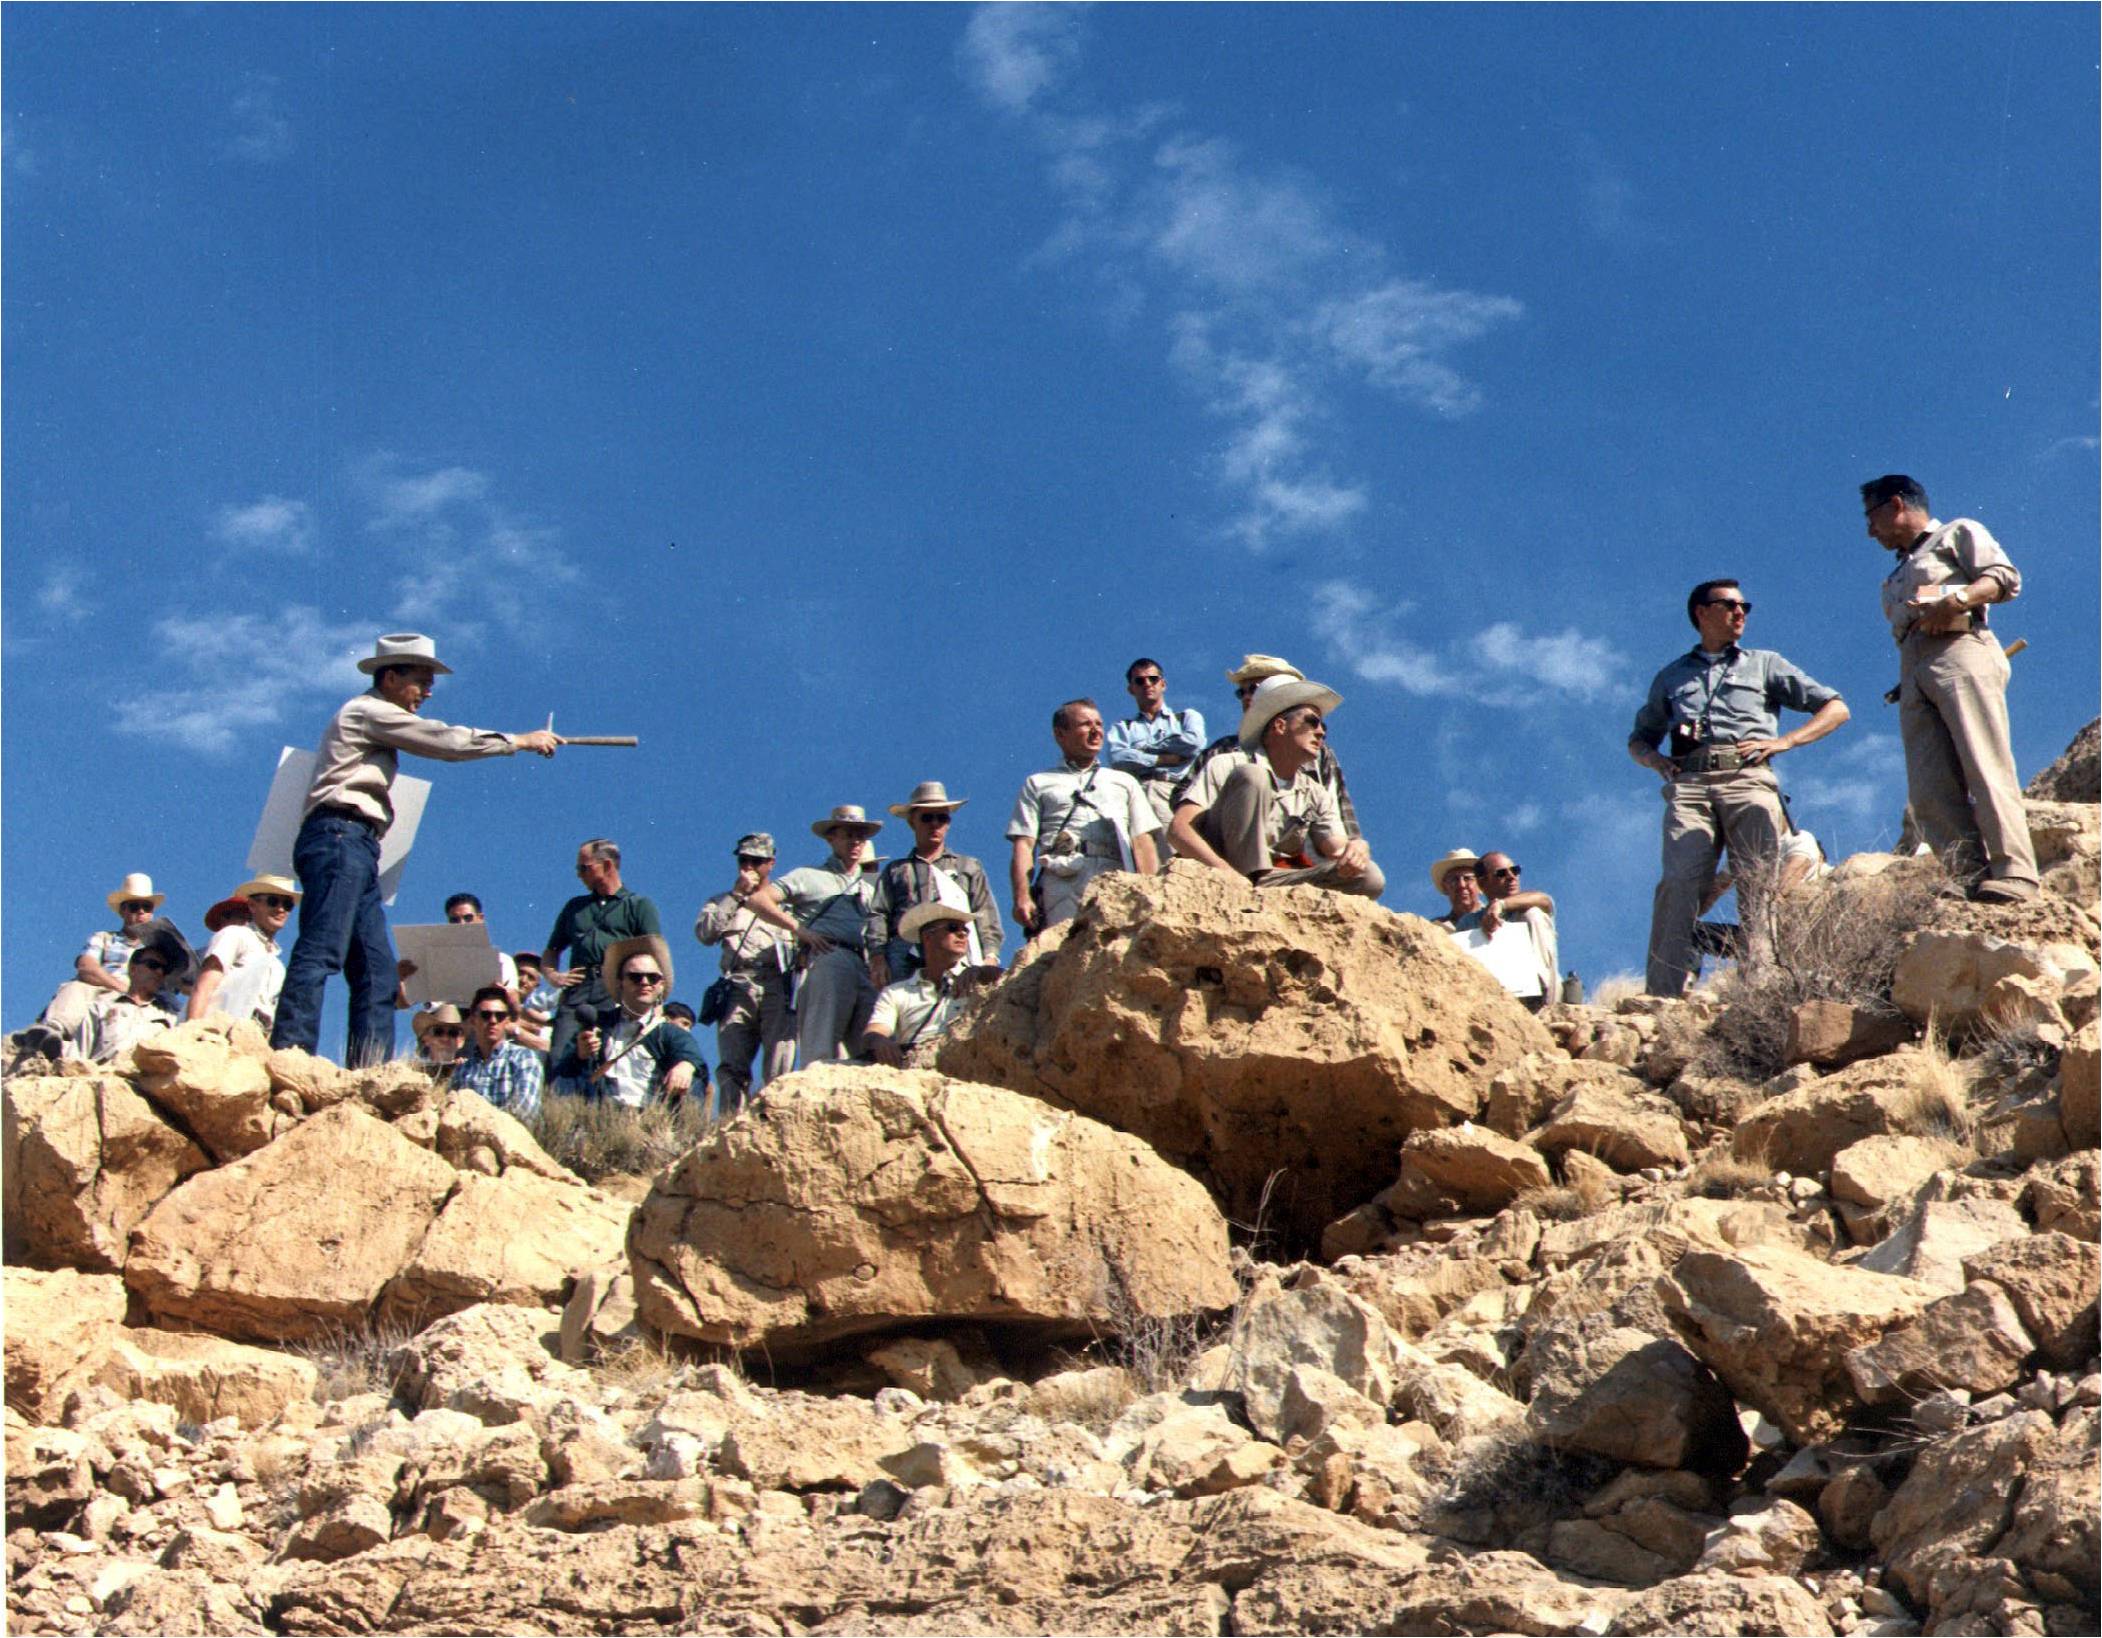 Astrogeologist Gene Shoemaker at Meteor Crater with Apollo astronauts during field trip in May 1967.